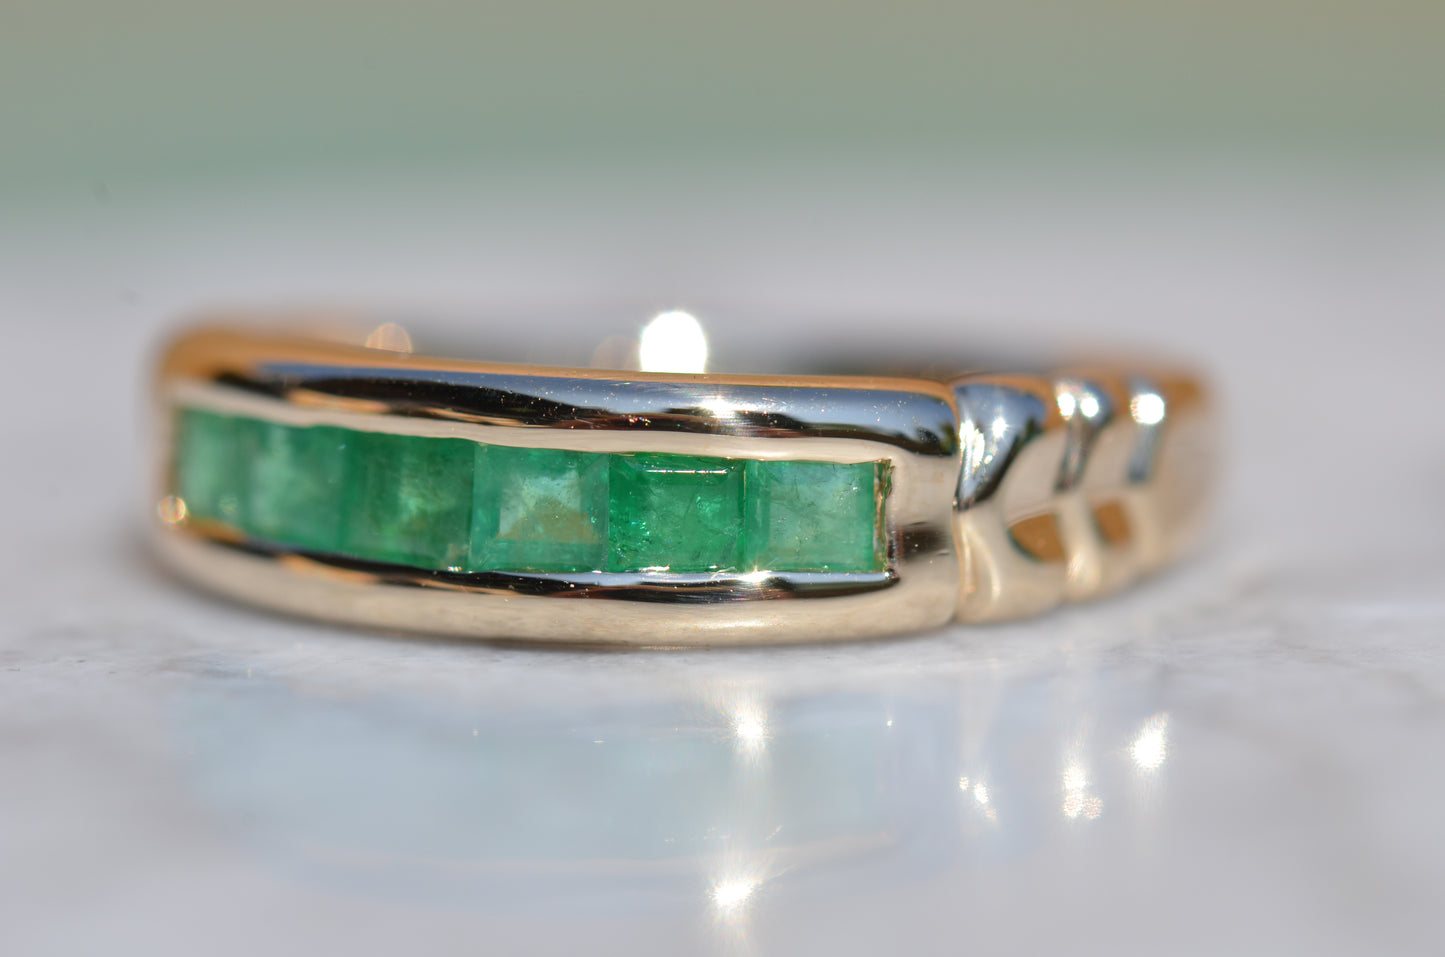 Chubby Vintage Emerald Channel Band